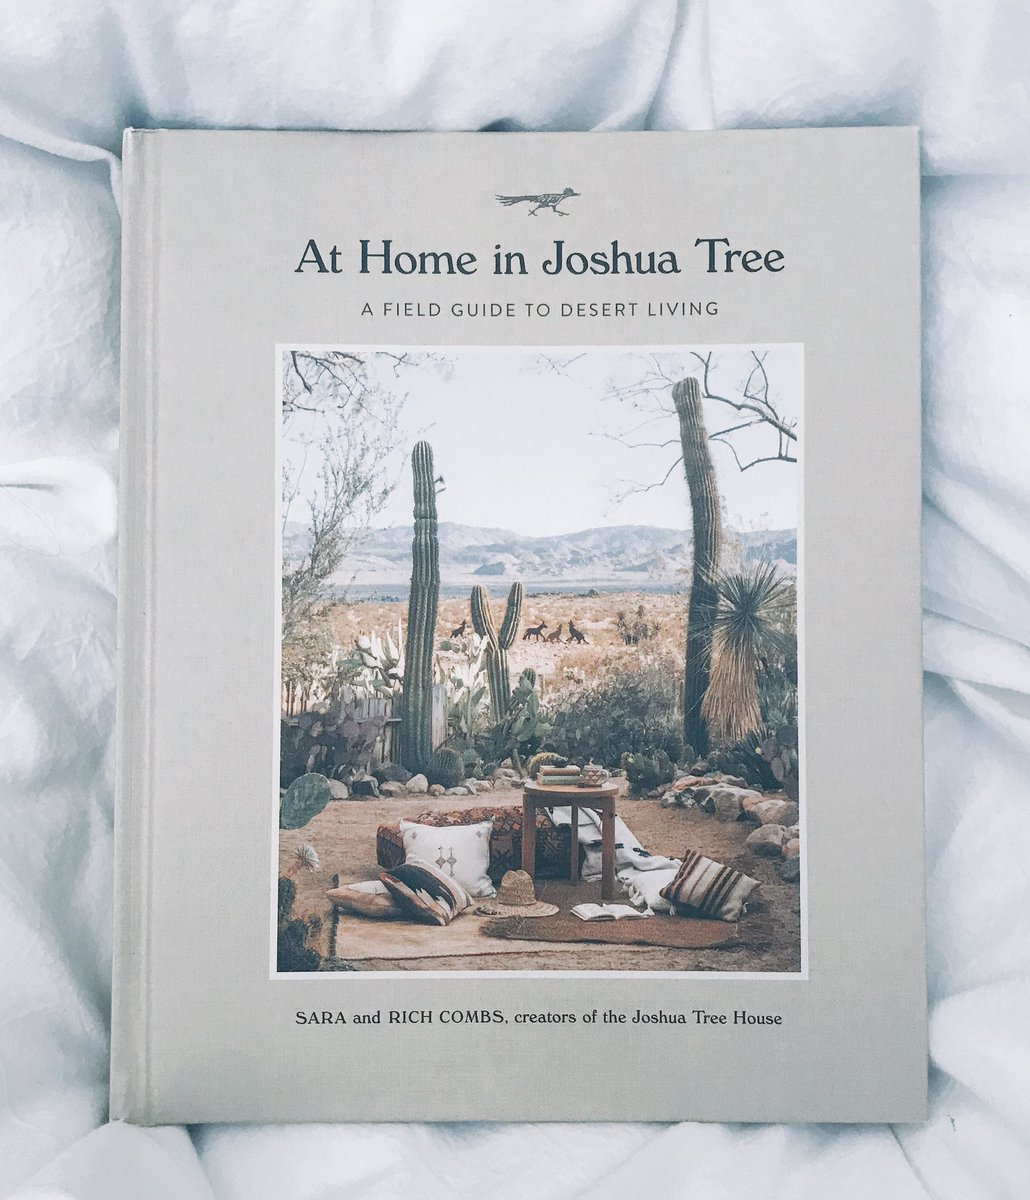 Our new addition to our Airstream! Thank you Sarah & Rich of @joshuatreehouse for putting this beautiful book together! 🙏🏽🌵#songbirdairstream #desertliving